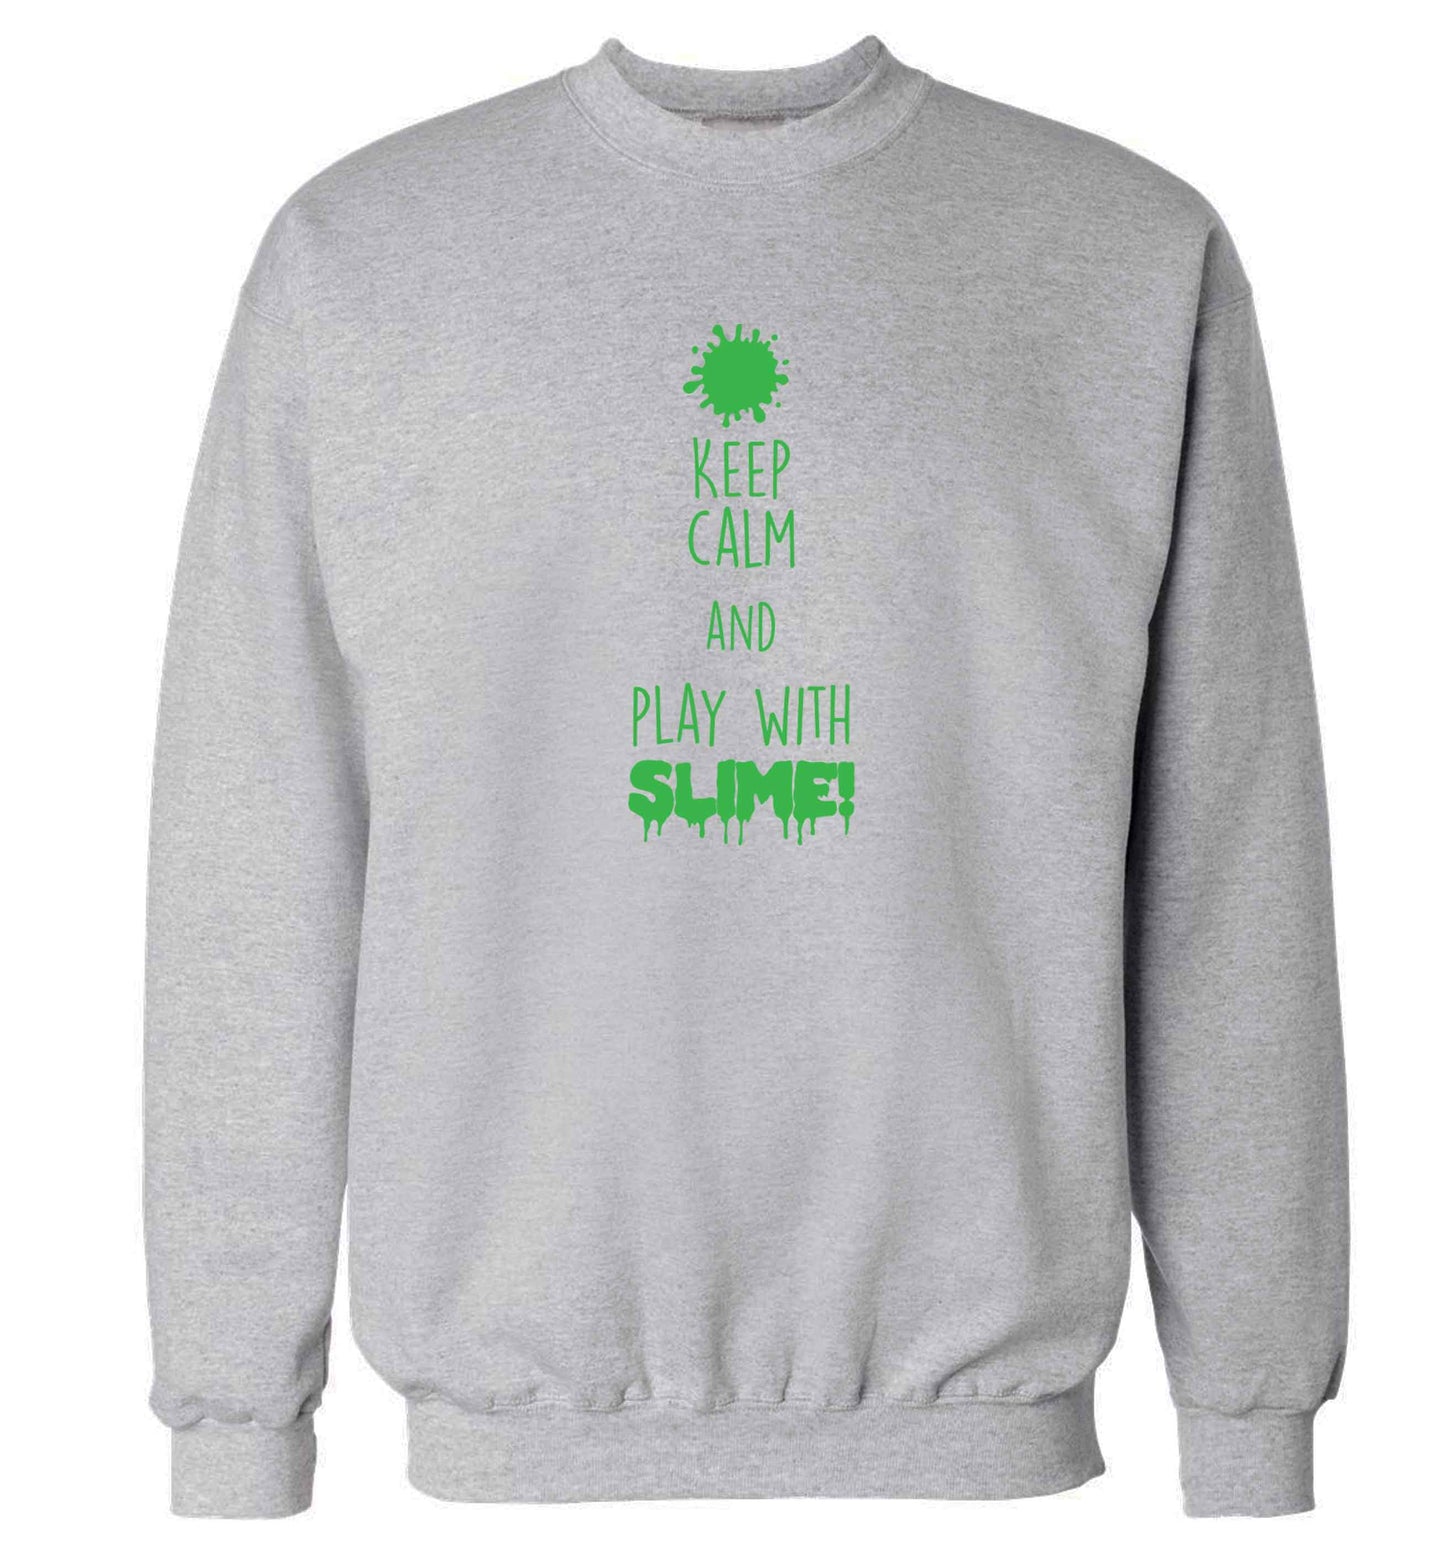 Neon green keep calm and play with slime!adult's unisex grey sweater 2XL